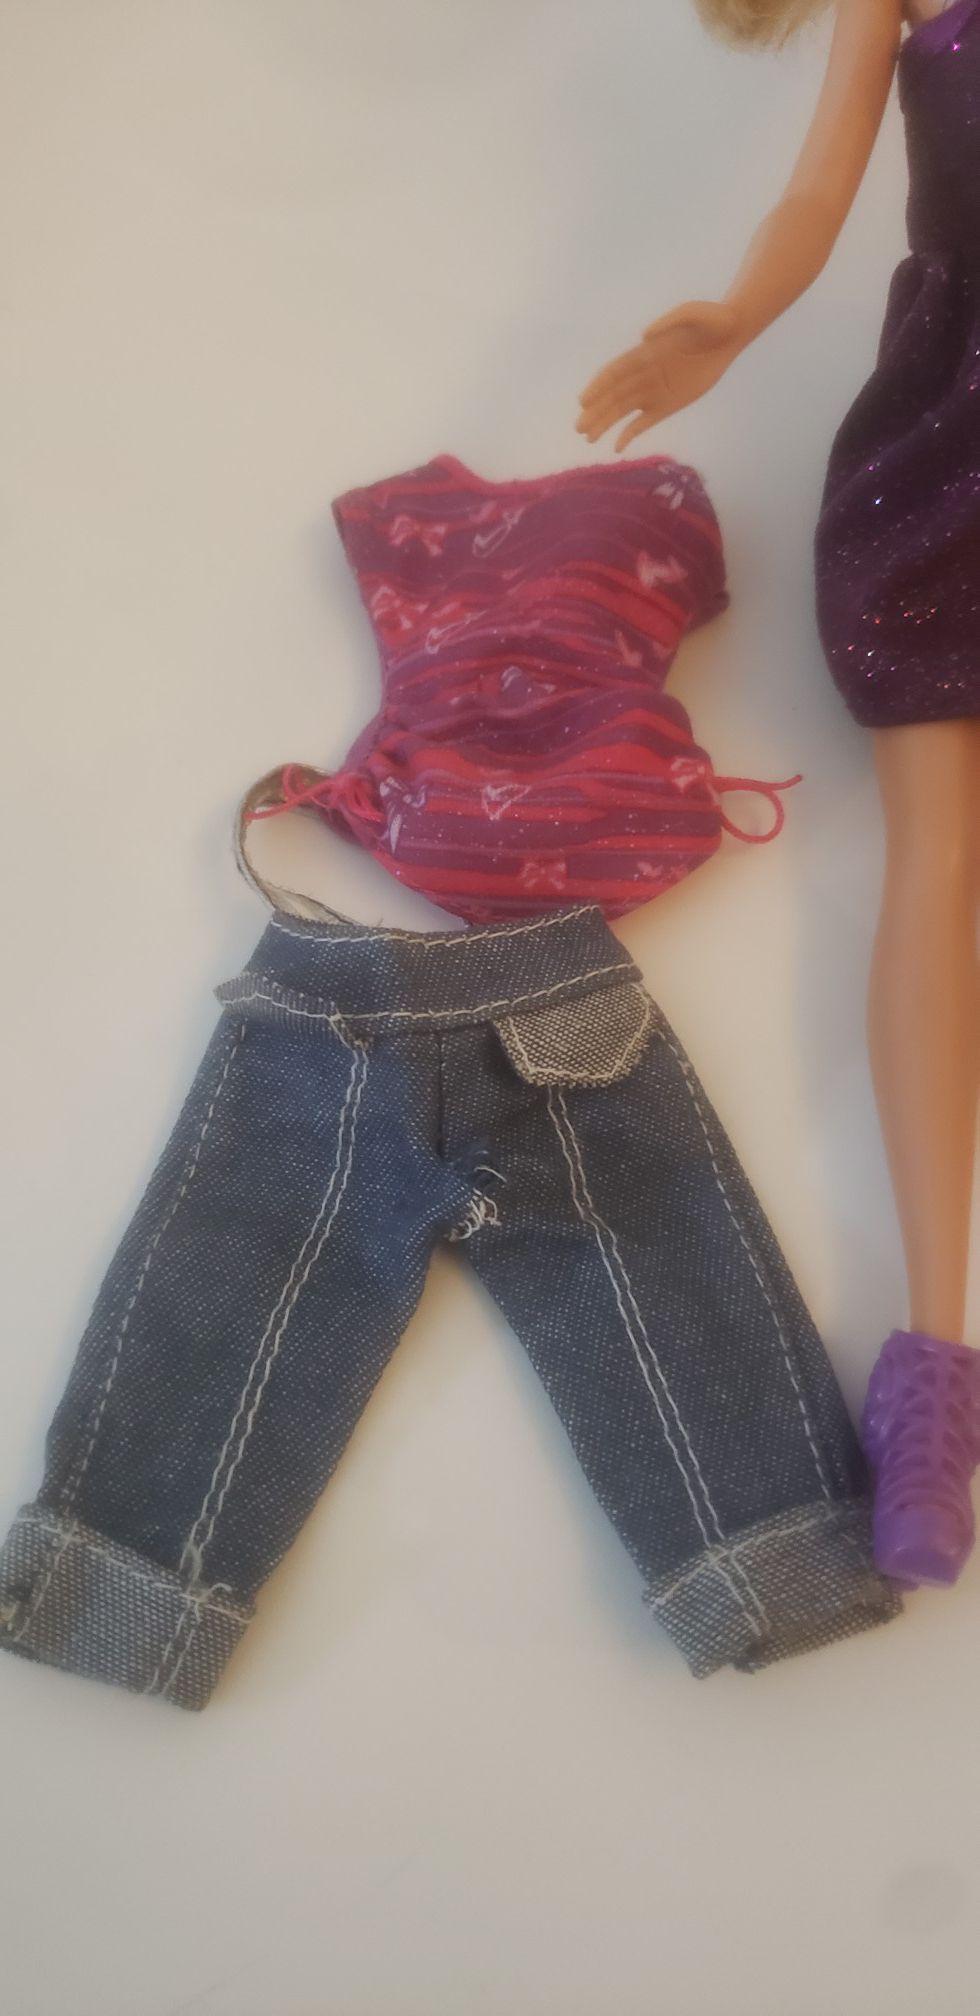 Barbie with clothes